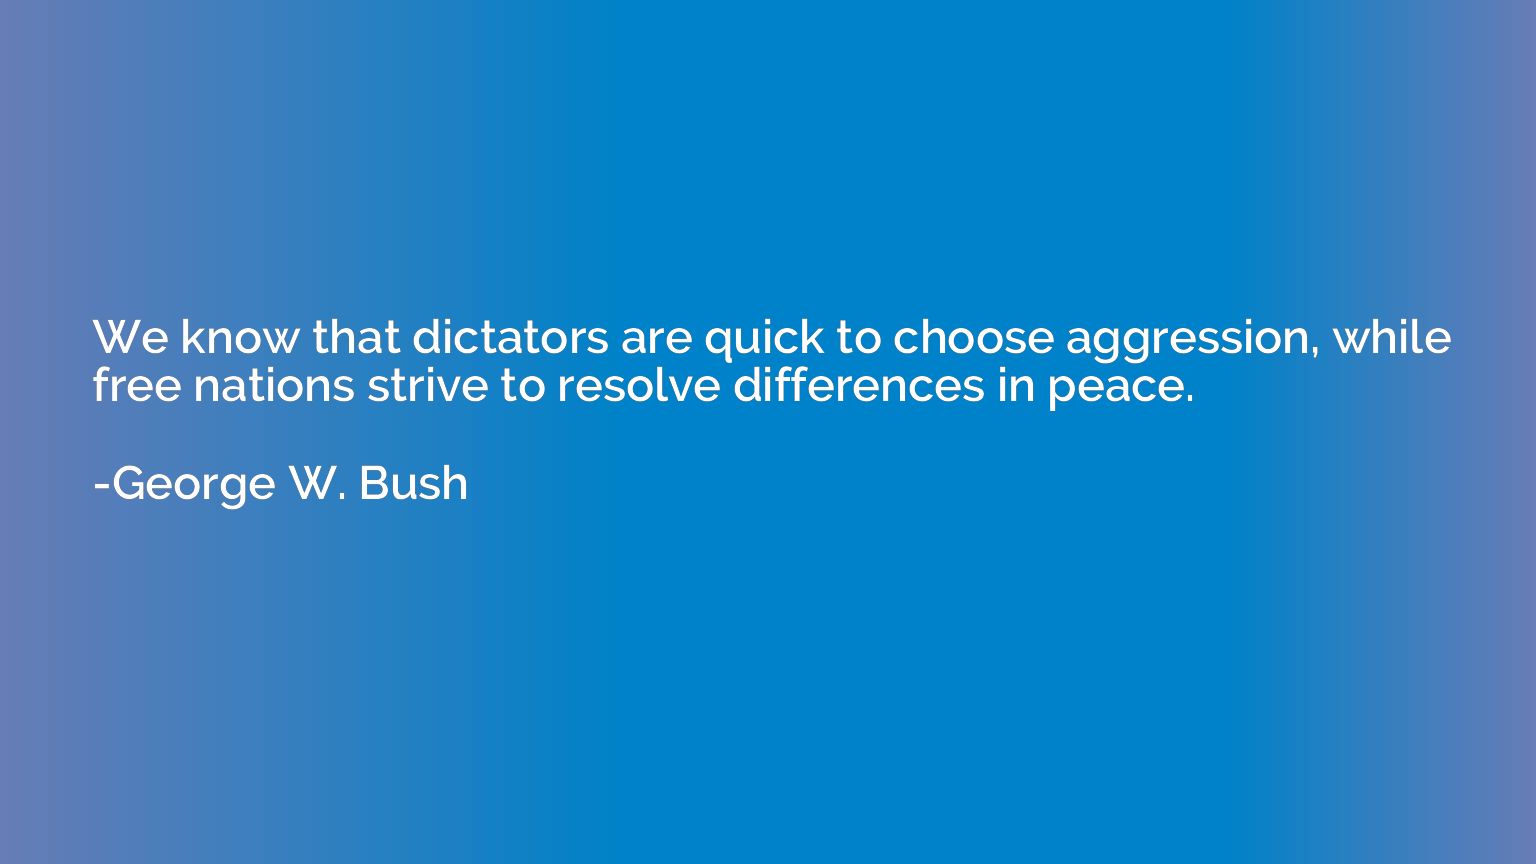 We know that dictators are quick to choose aggression, while